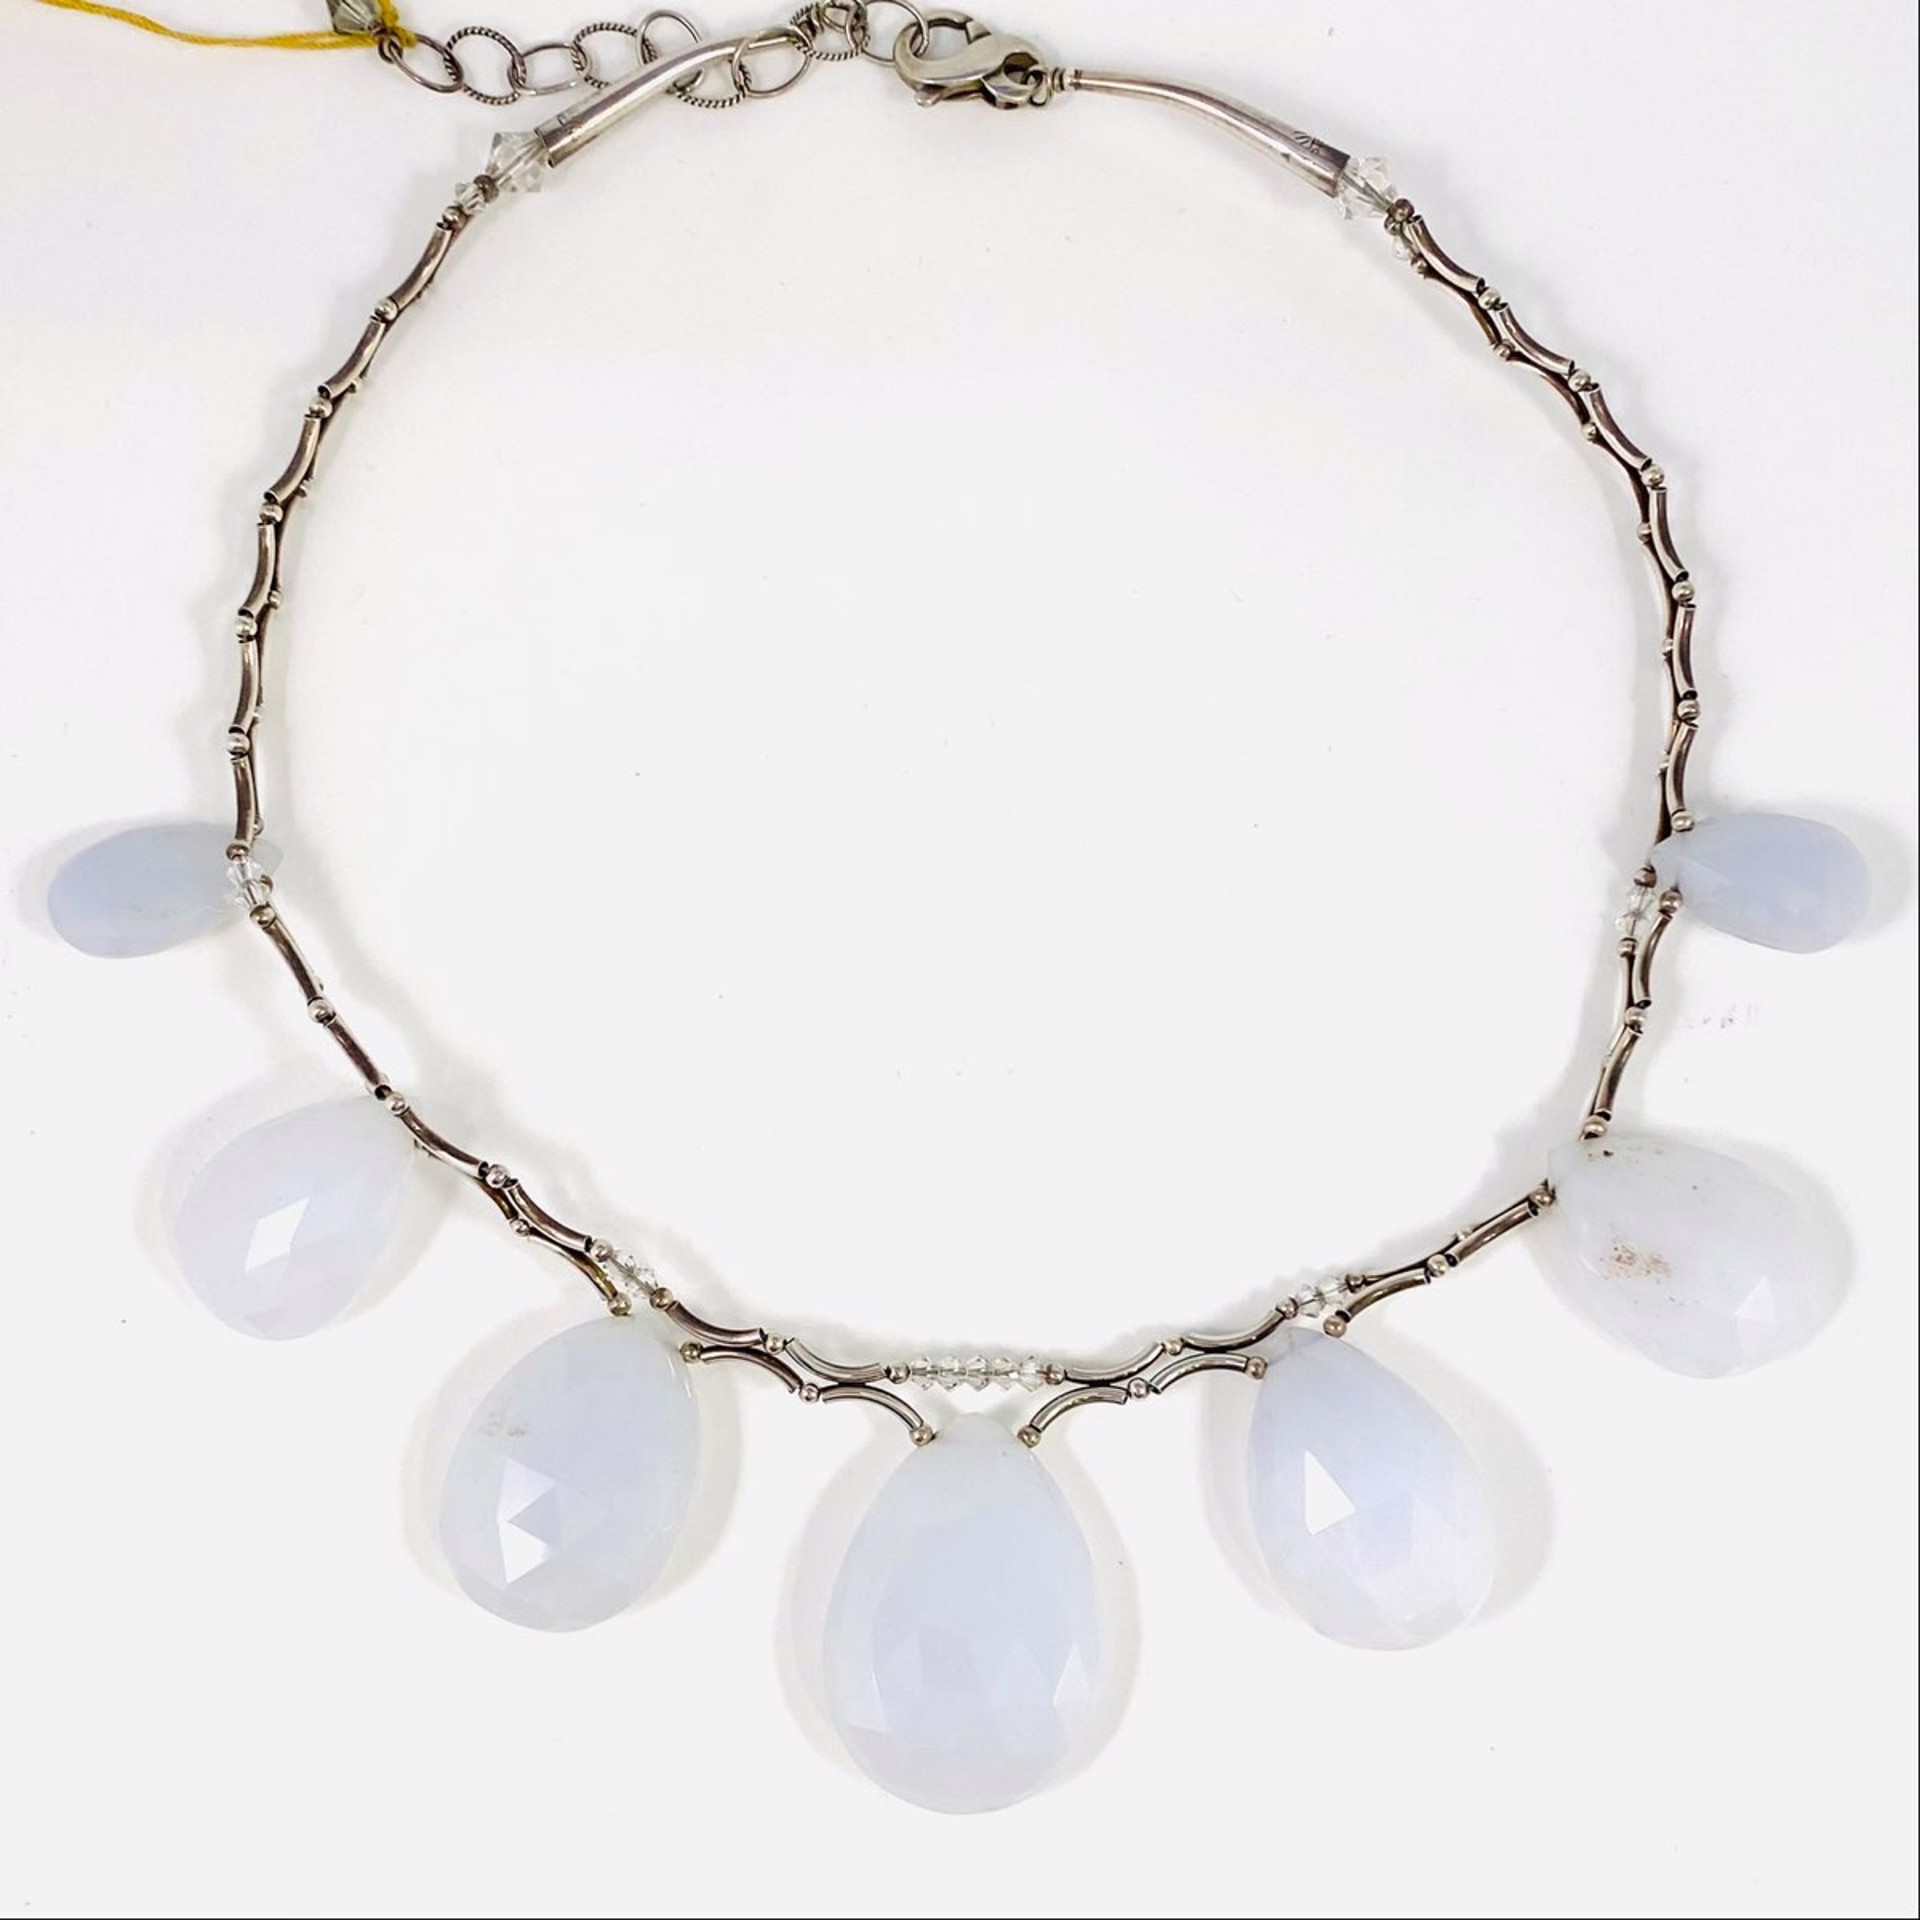 Pale Blue Chalcedony Necklace by Soteria